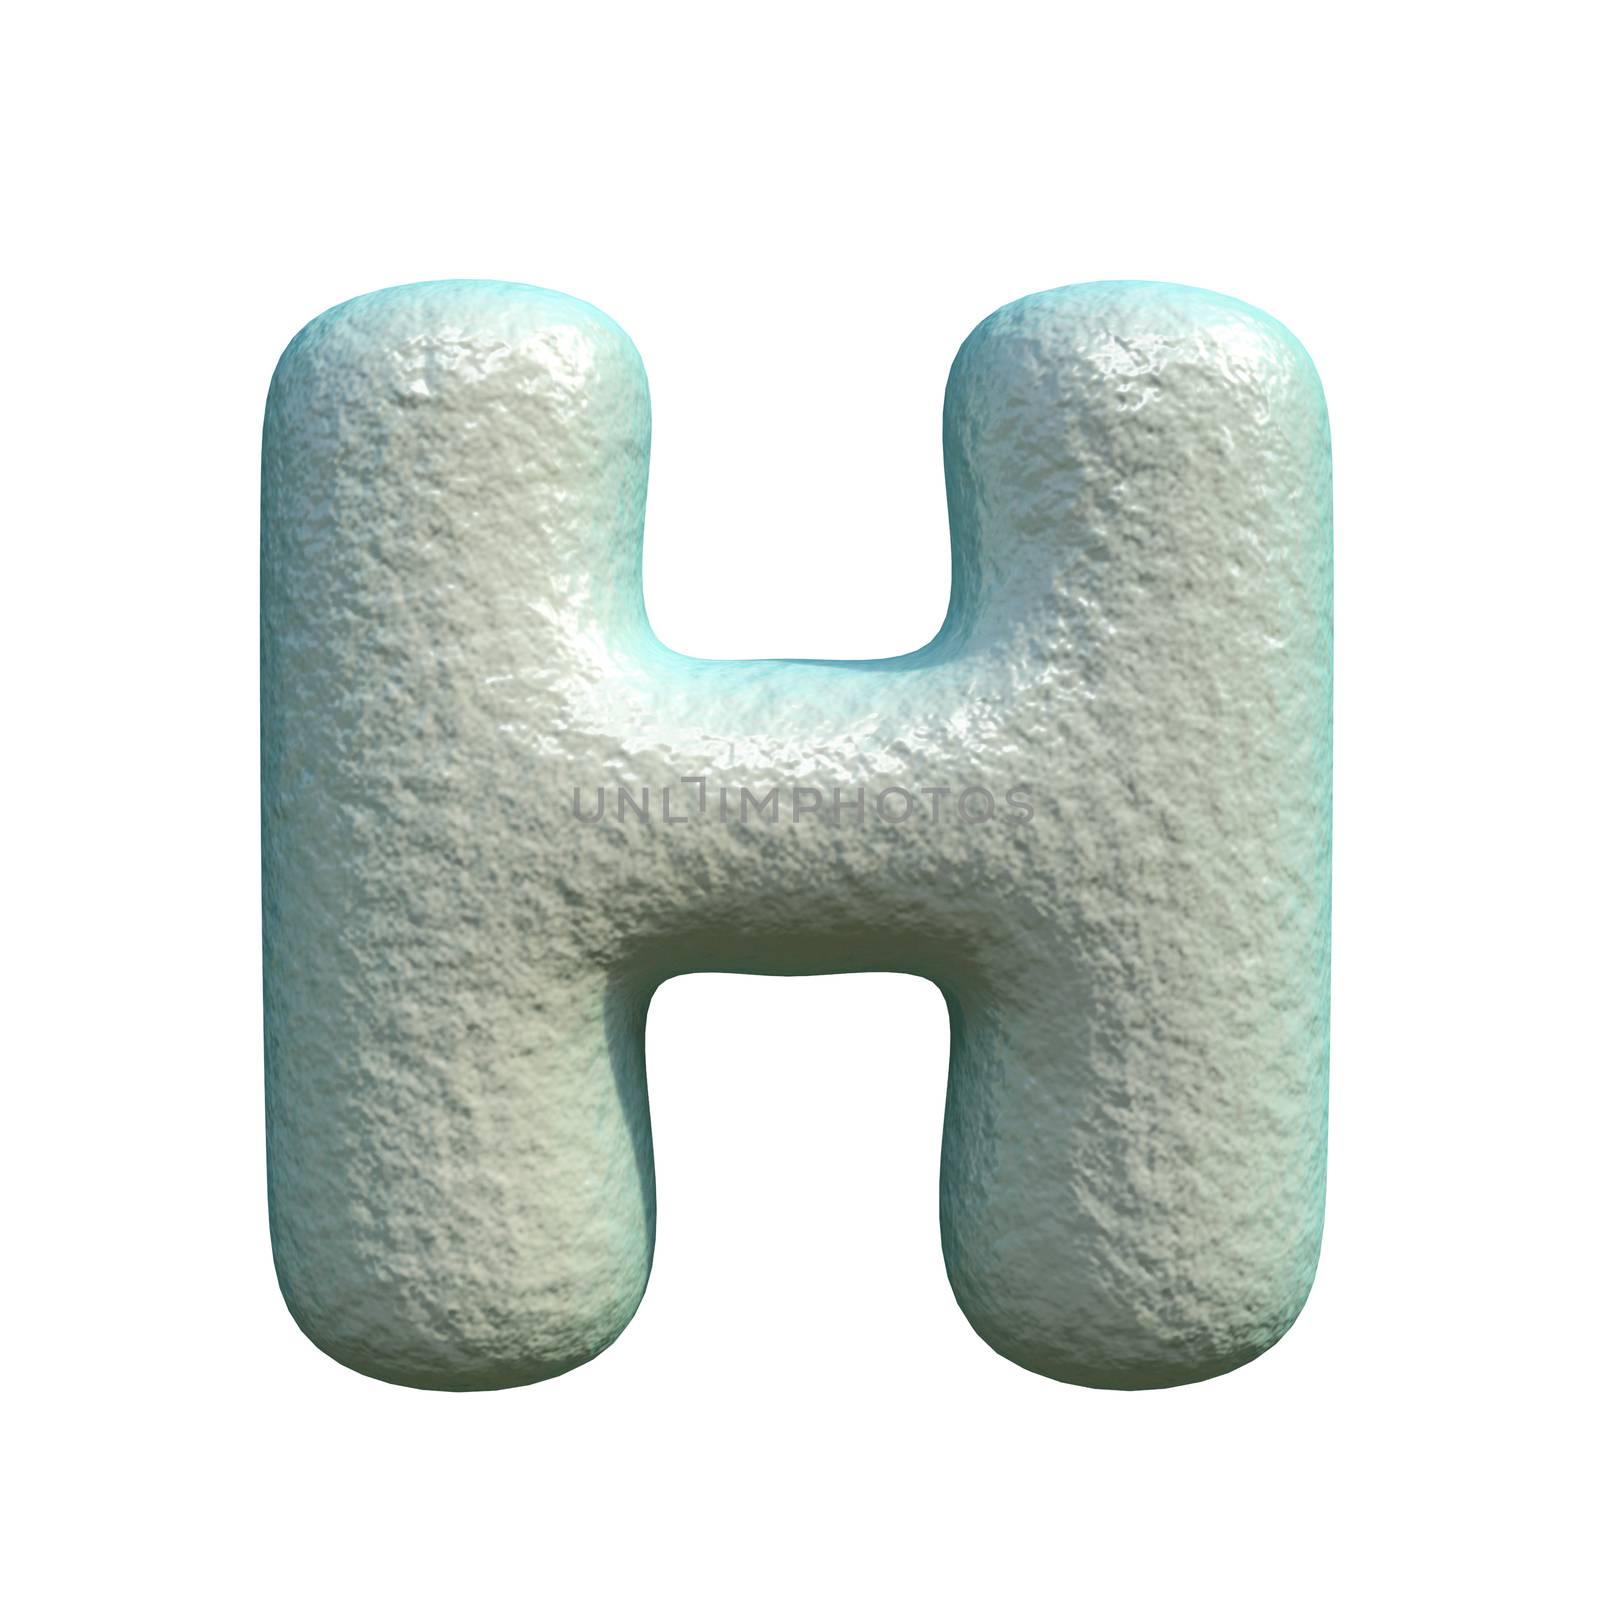 Grey blue clay font Letter H 3D by djmilic